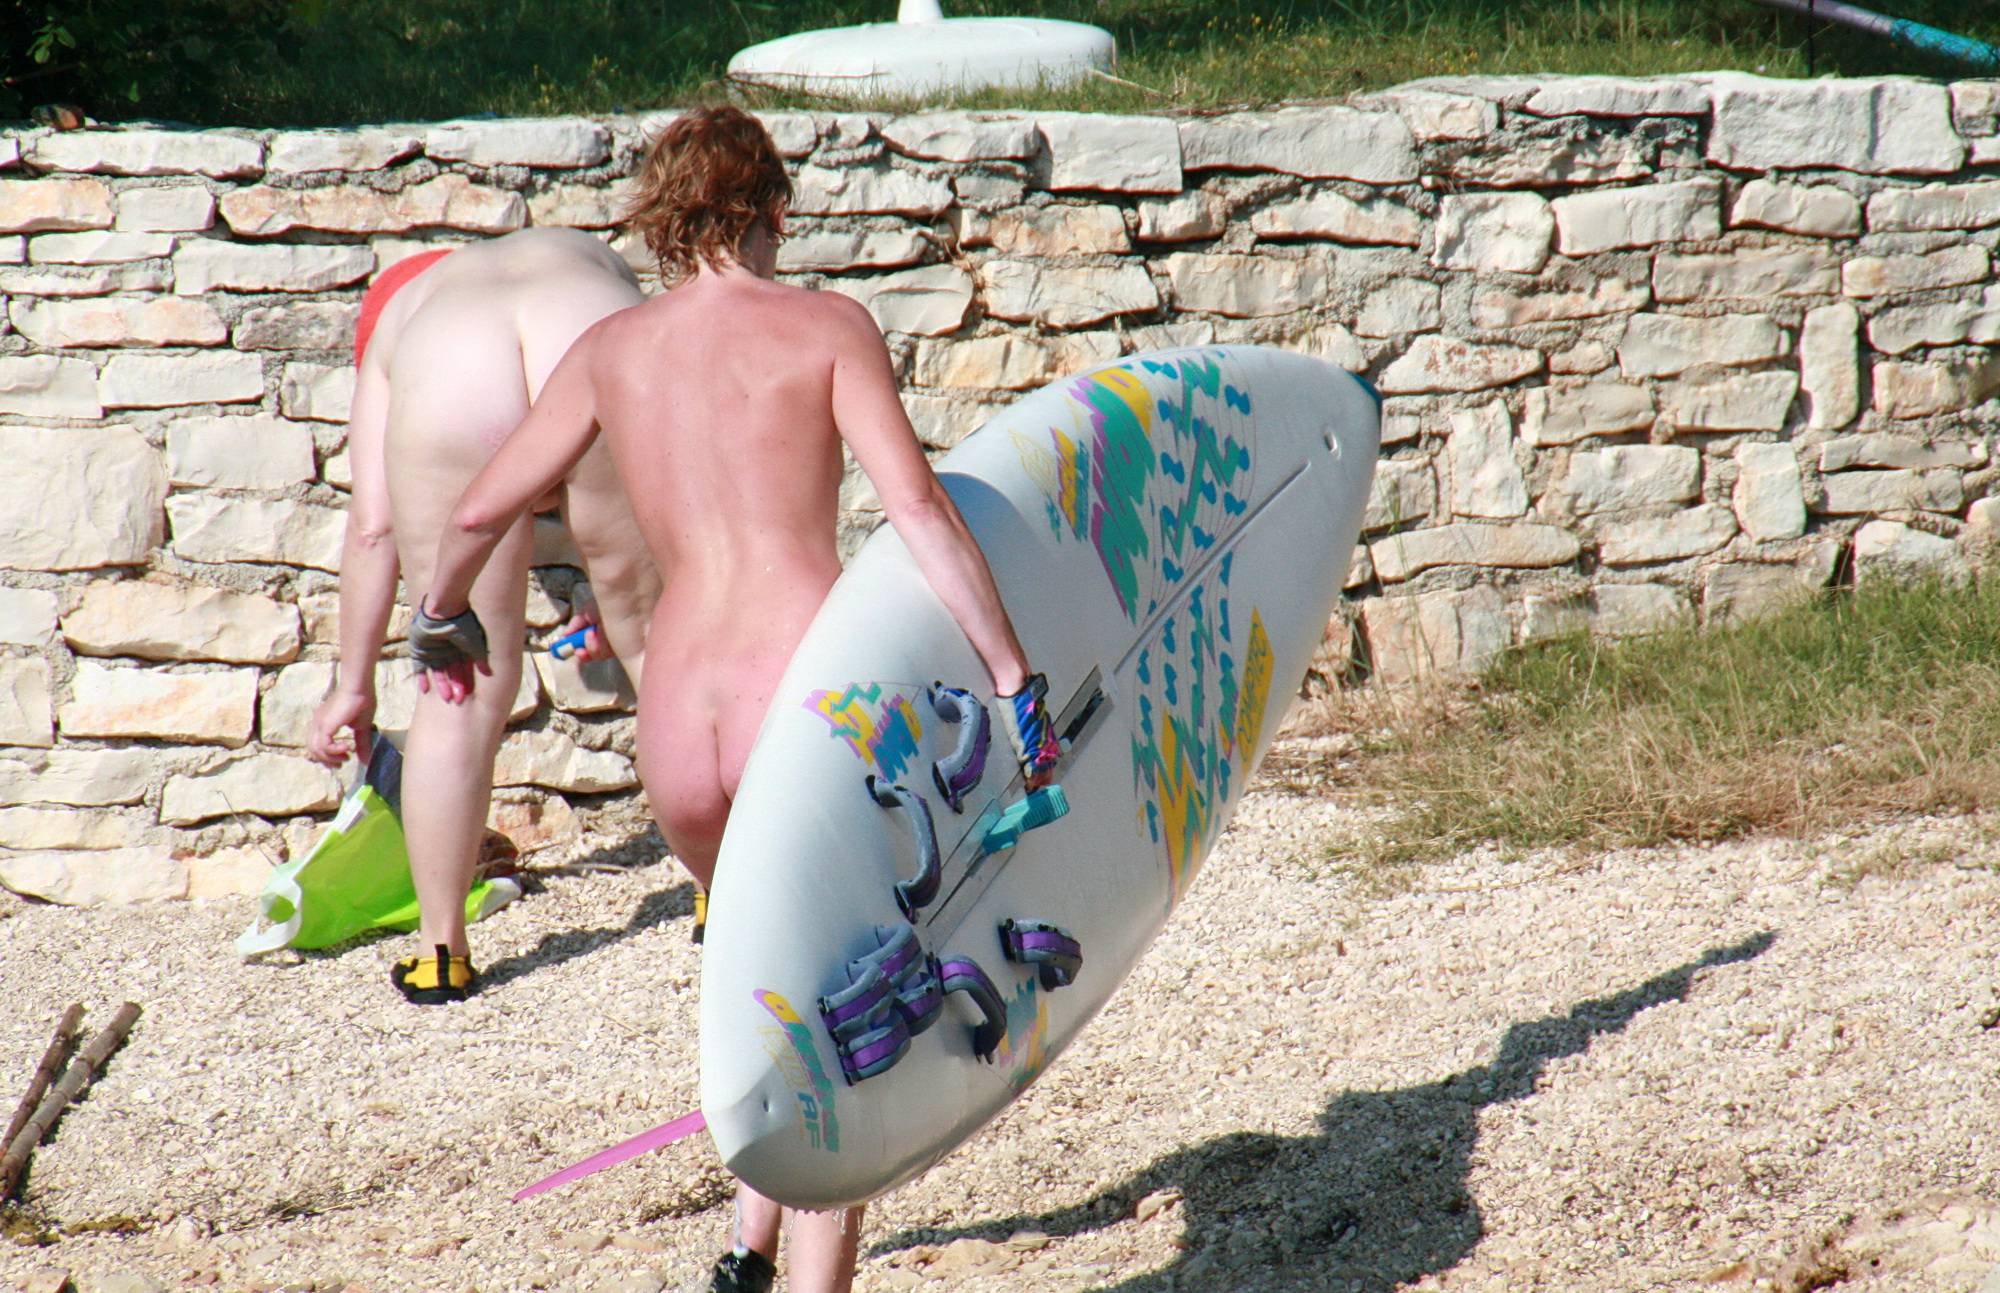 Pure Nudism Pics-Wind Surfing Afternoon - 3